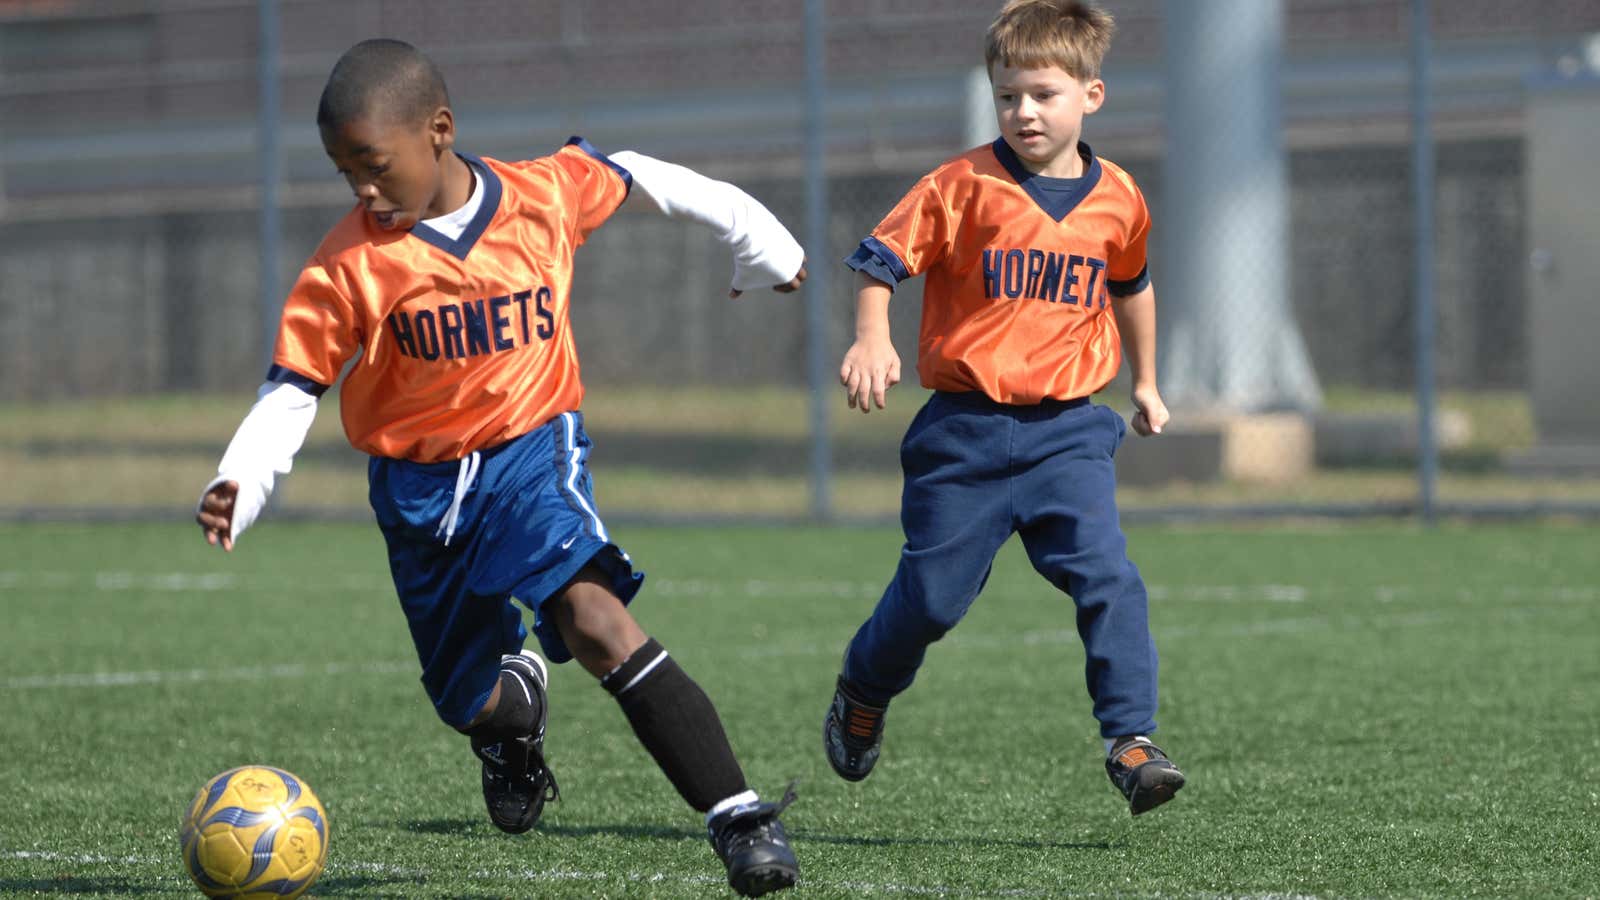 For developmentally disabled kids, the benefits of organized sports are huge